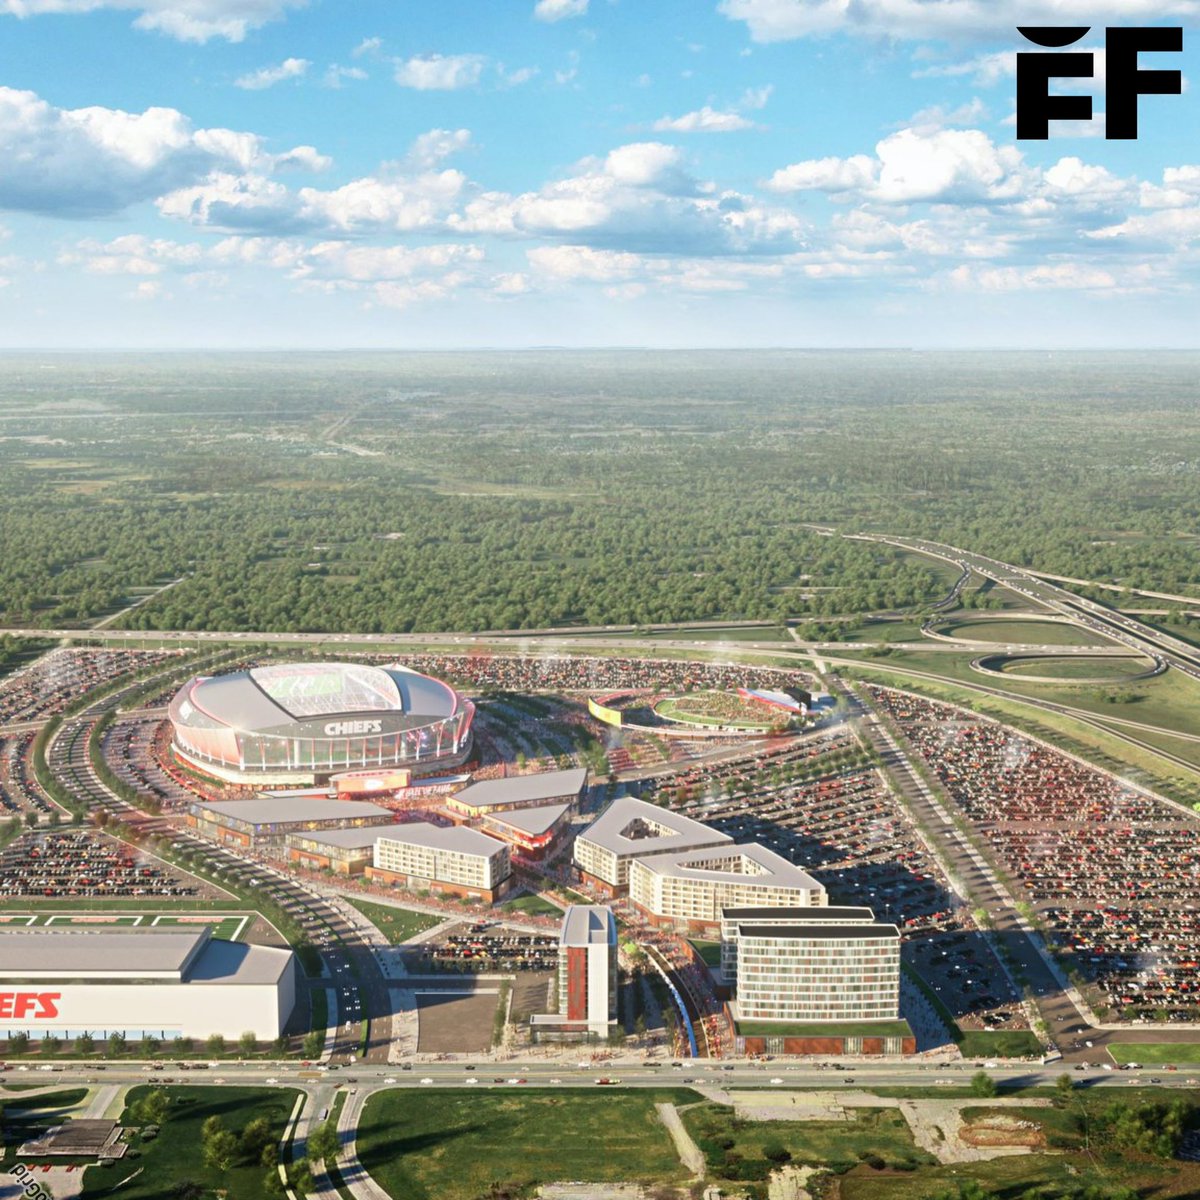 Designs for a new domed Chiefs stadium district have been shown to lawmakers in Kansas, per @fox4kc. The stadium district would be built near the Kansas Speedway—across state lines and about 20 miles from Arrowhead Stadium.